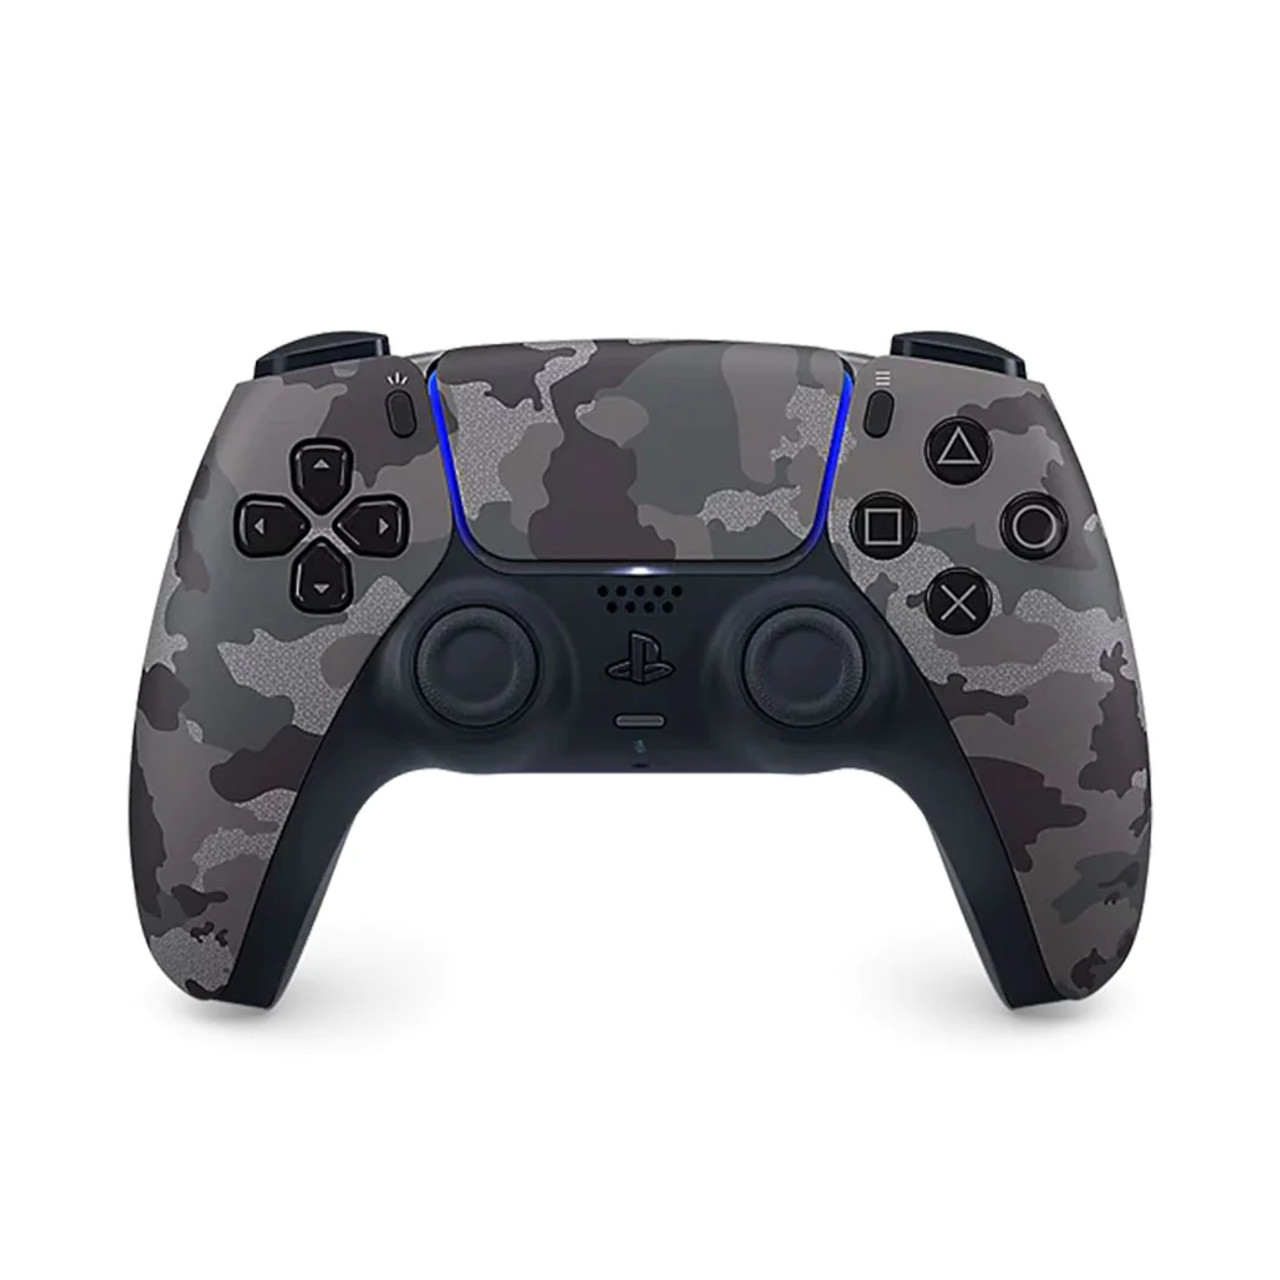 MANETTE PS4 - Groupe Banco